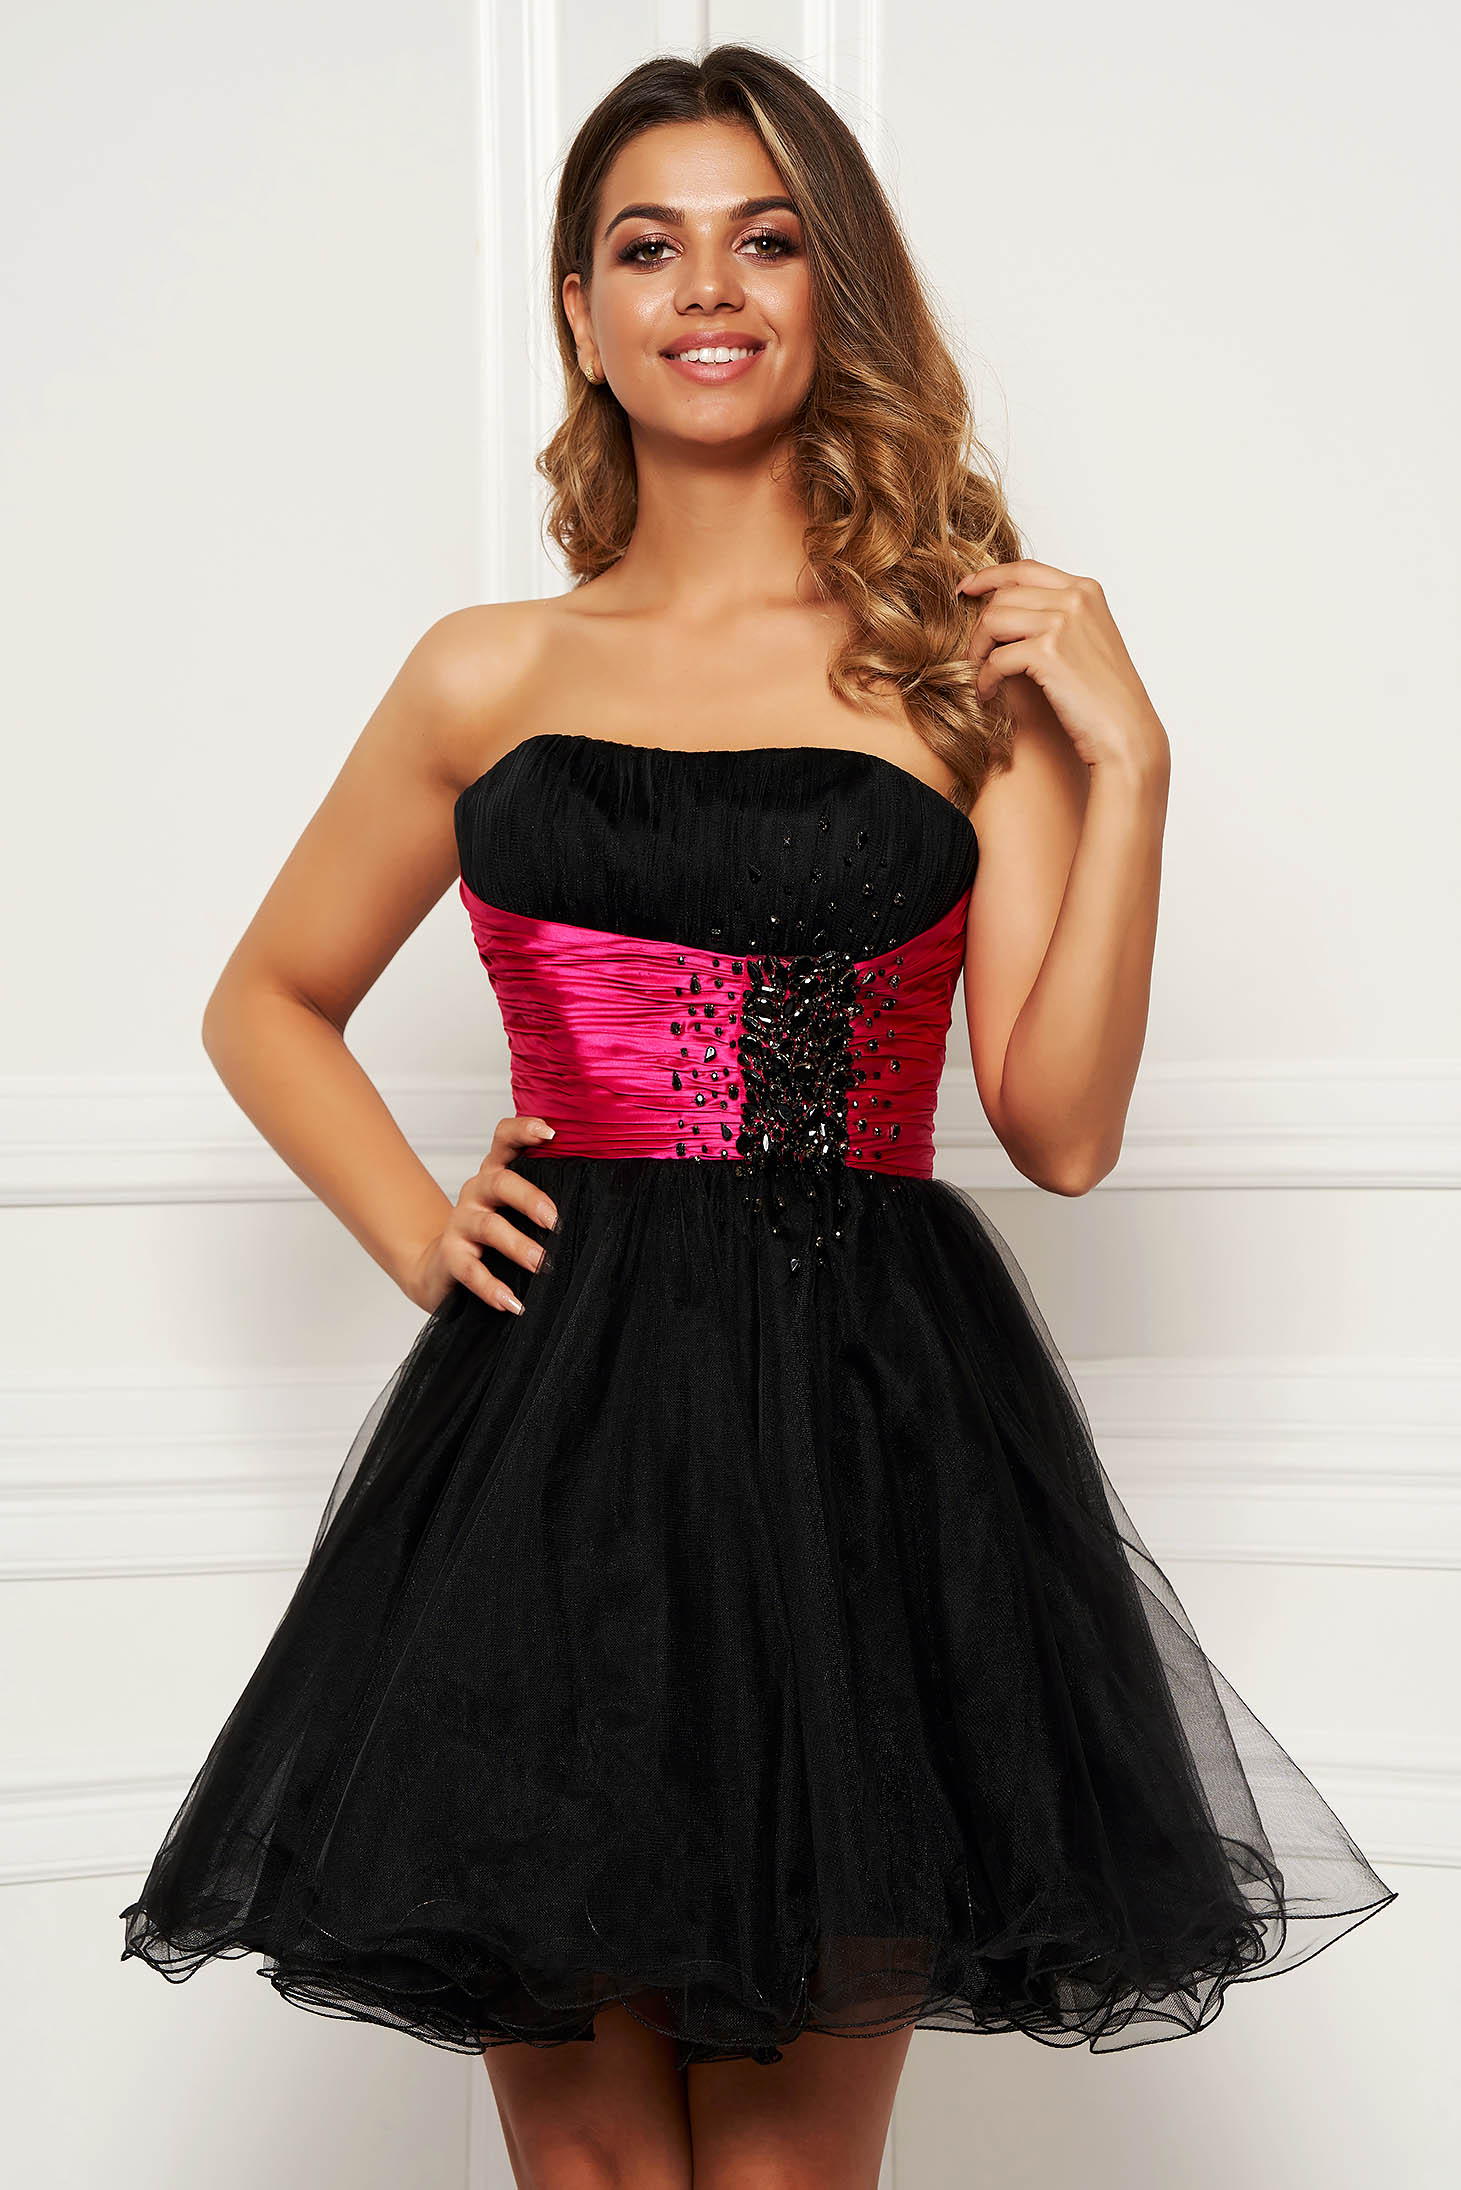 Sherri Hill fuchsia dress luxurious corset with crystal embellished details with push-up cups 2 - StarShinerS.com